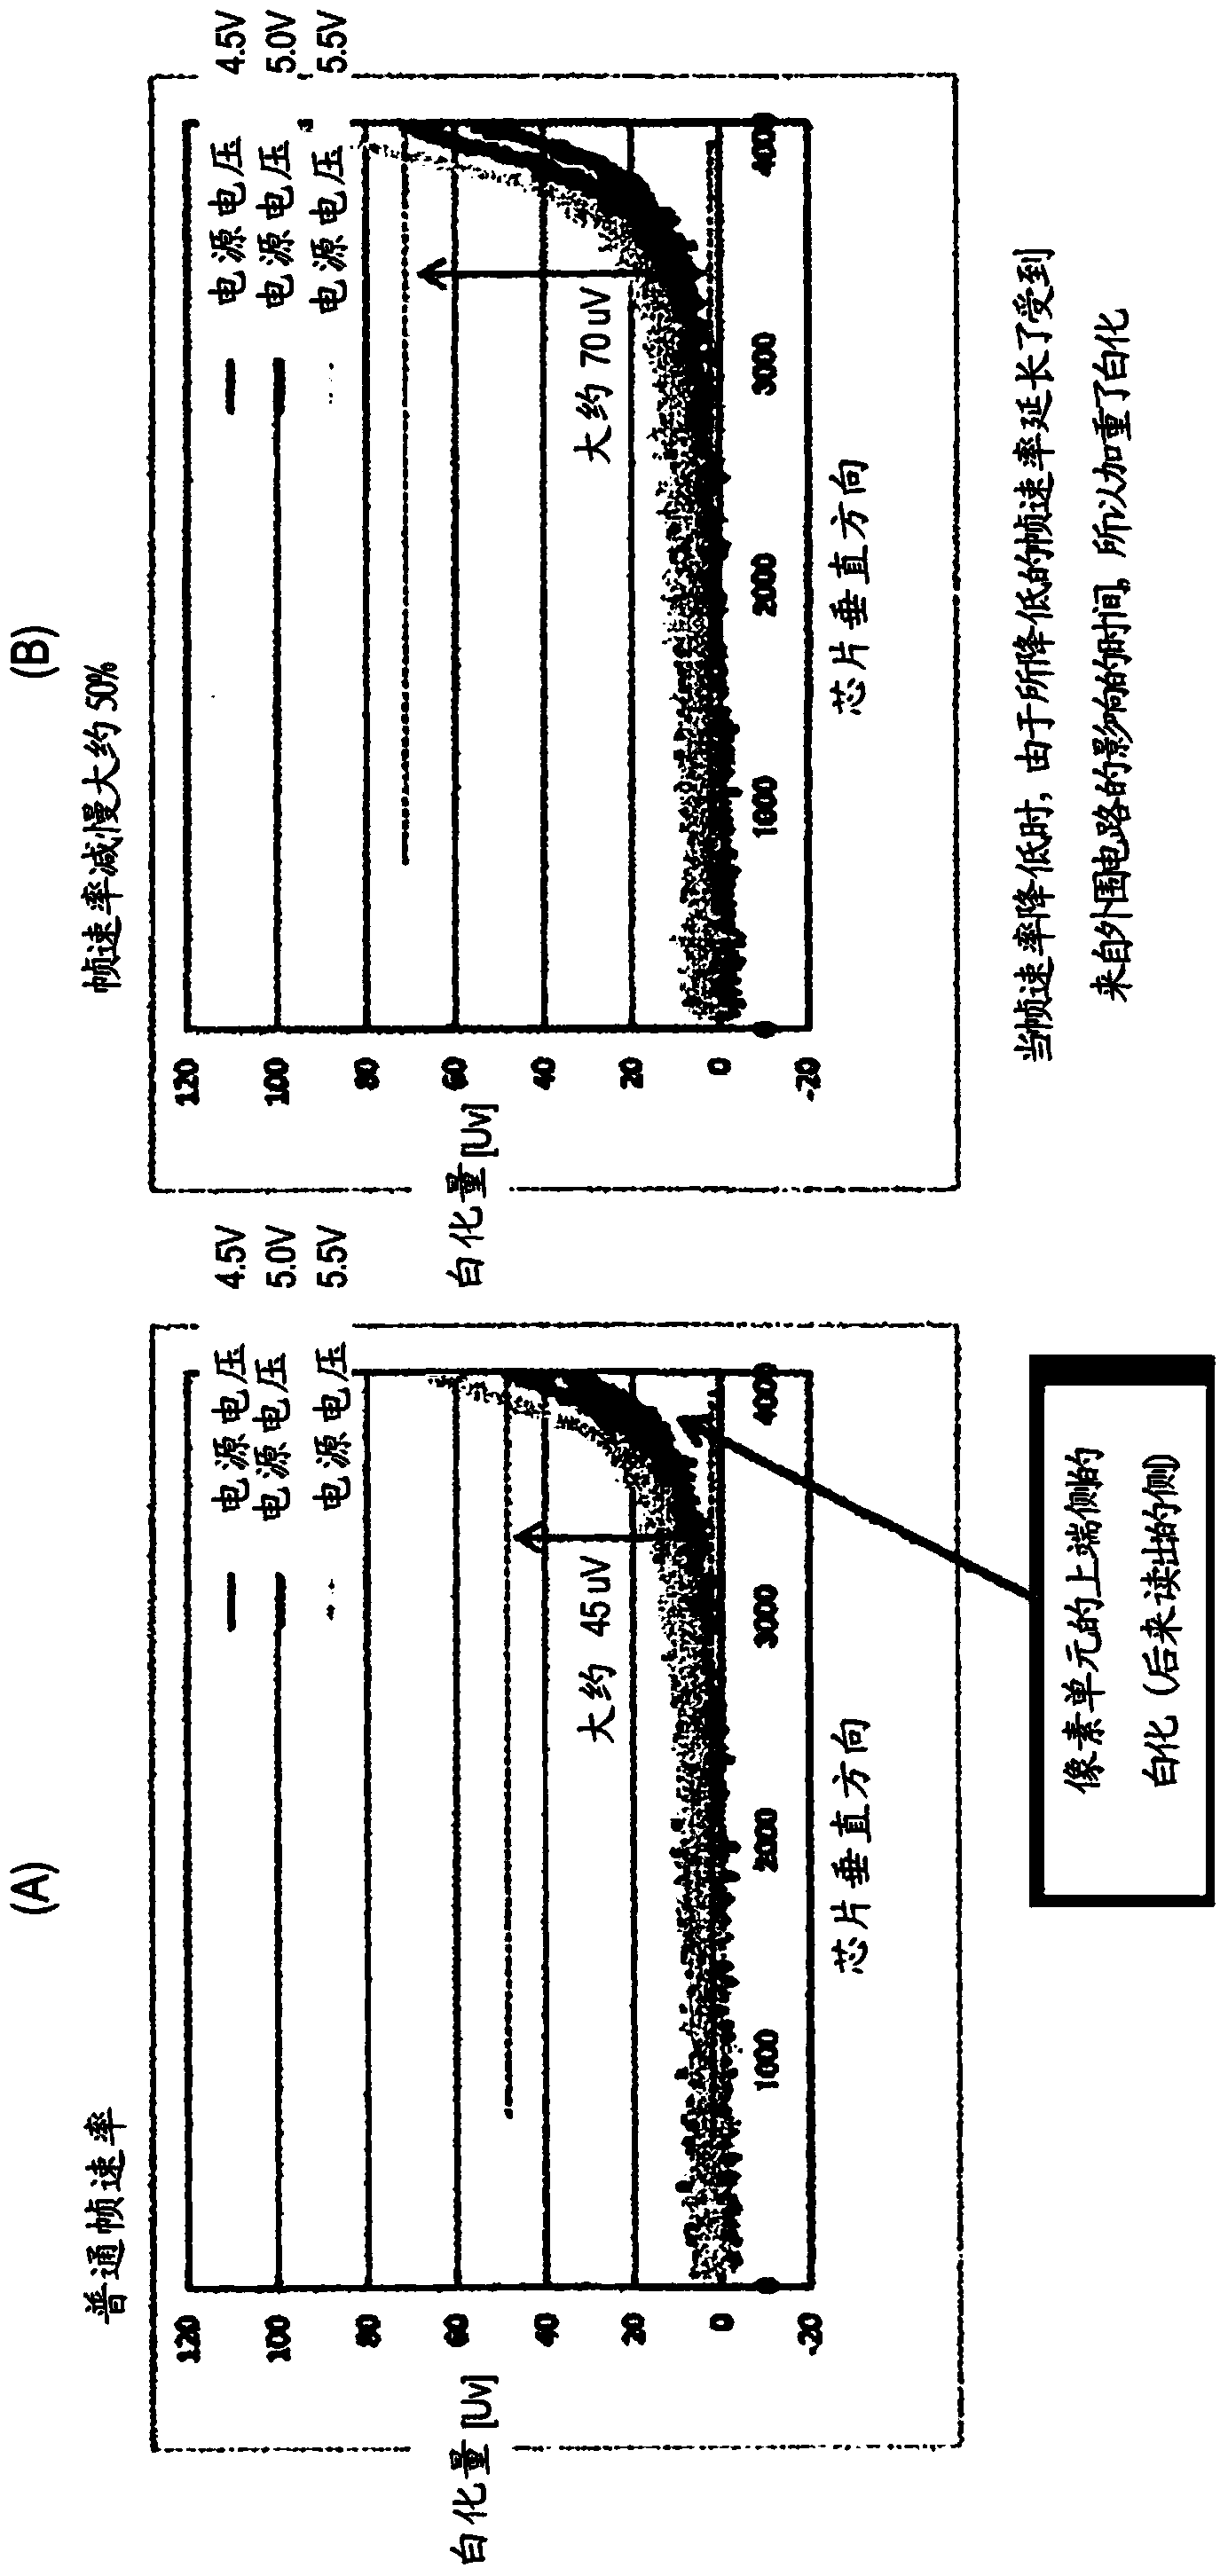 Solid-state imaging element, method for driving same, and camera system